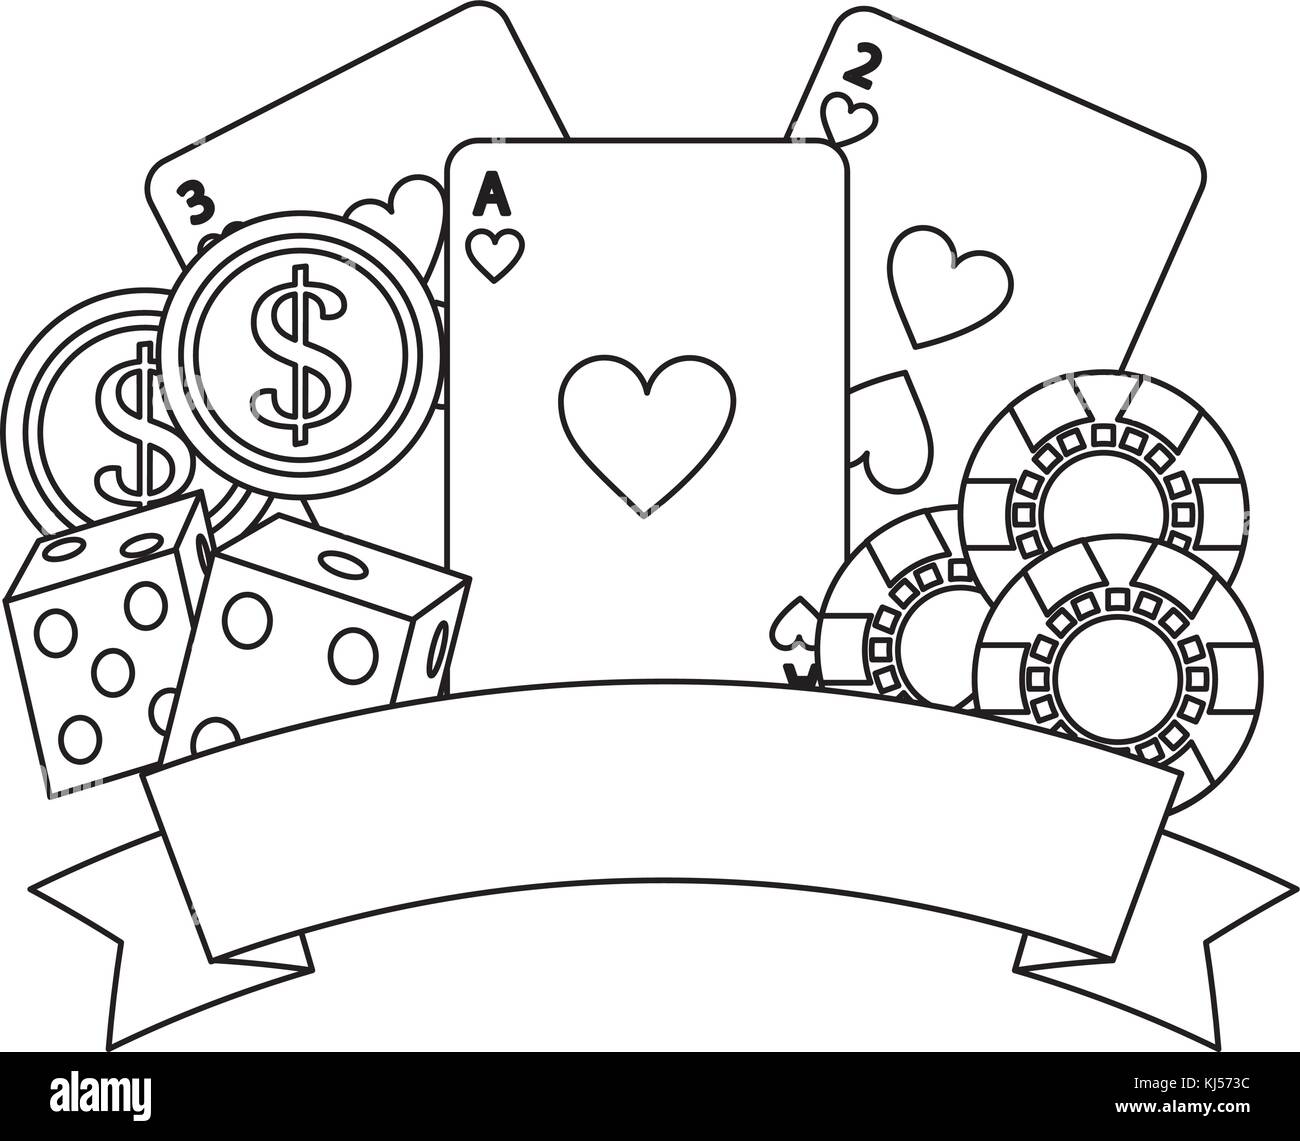 Download casino poker with playing cards dice and gambling chips banner Stock Vector Art & Illustration ...